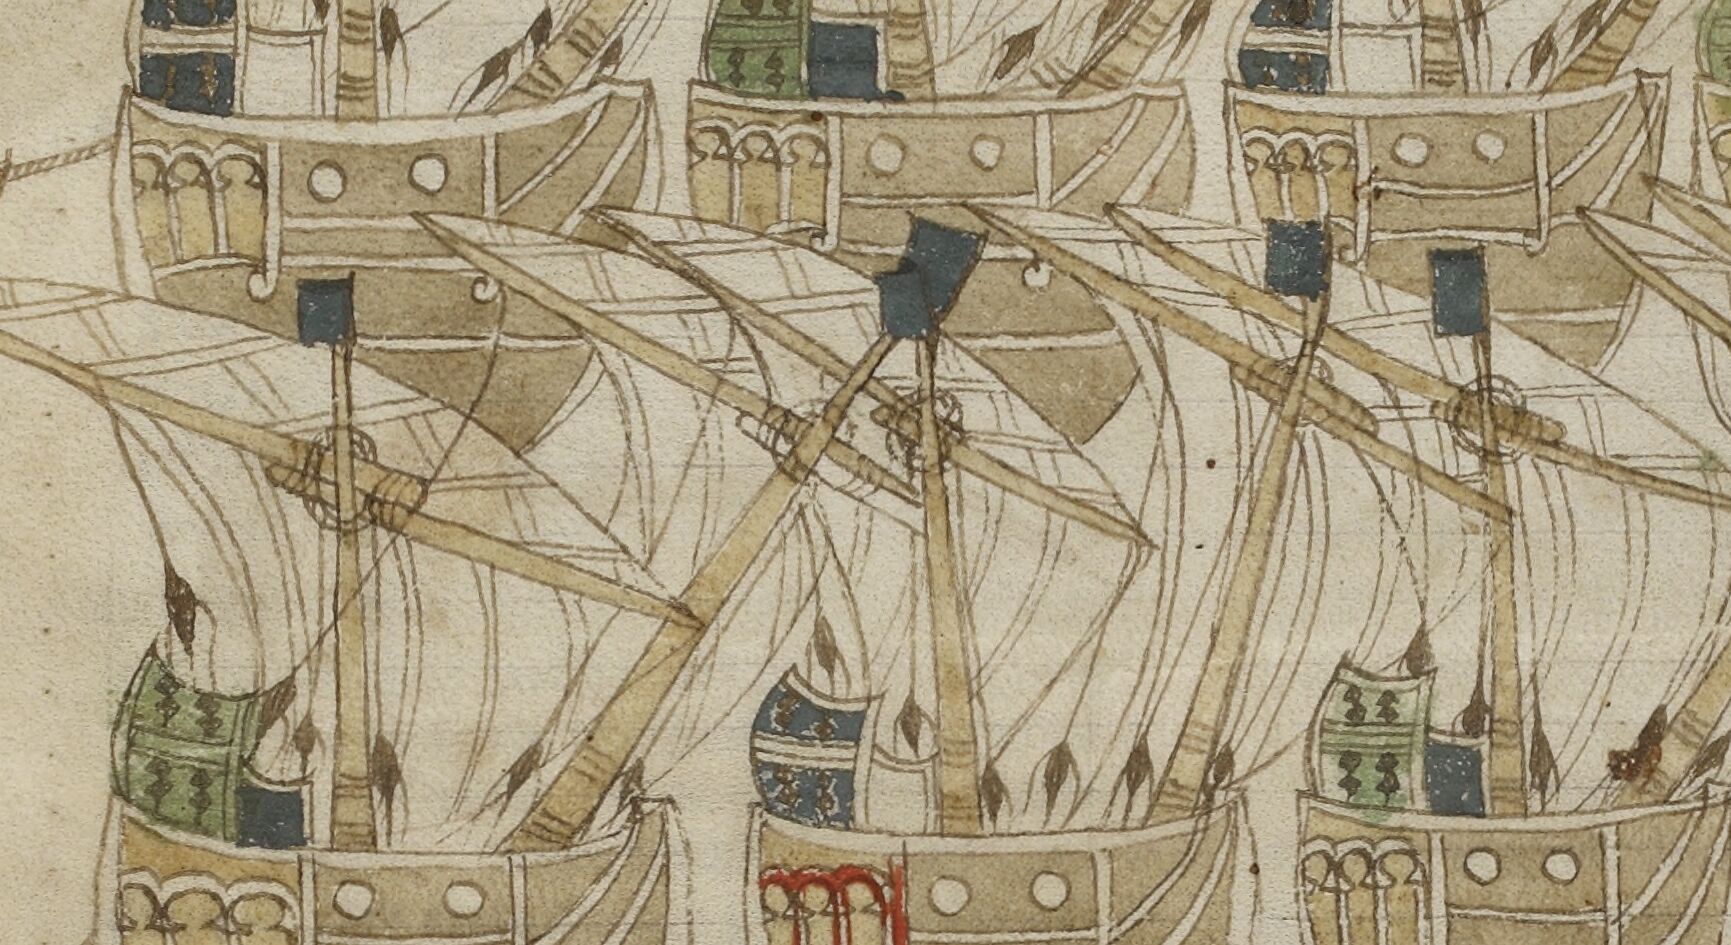 Armada at the Battle of Troyes